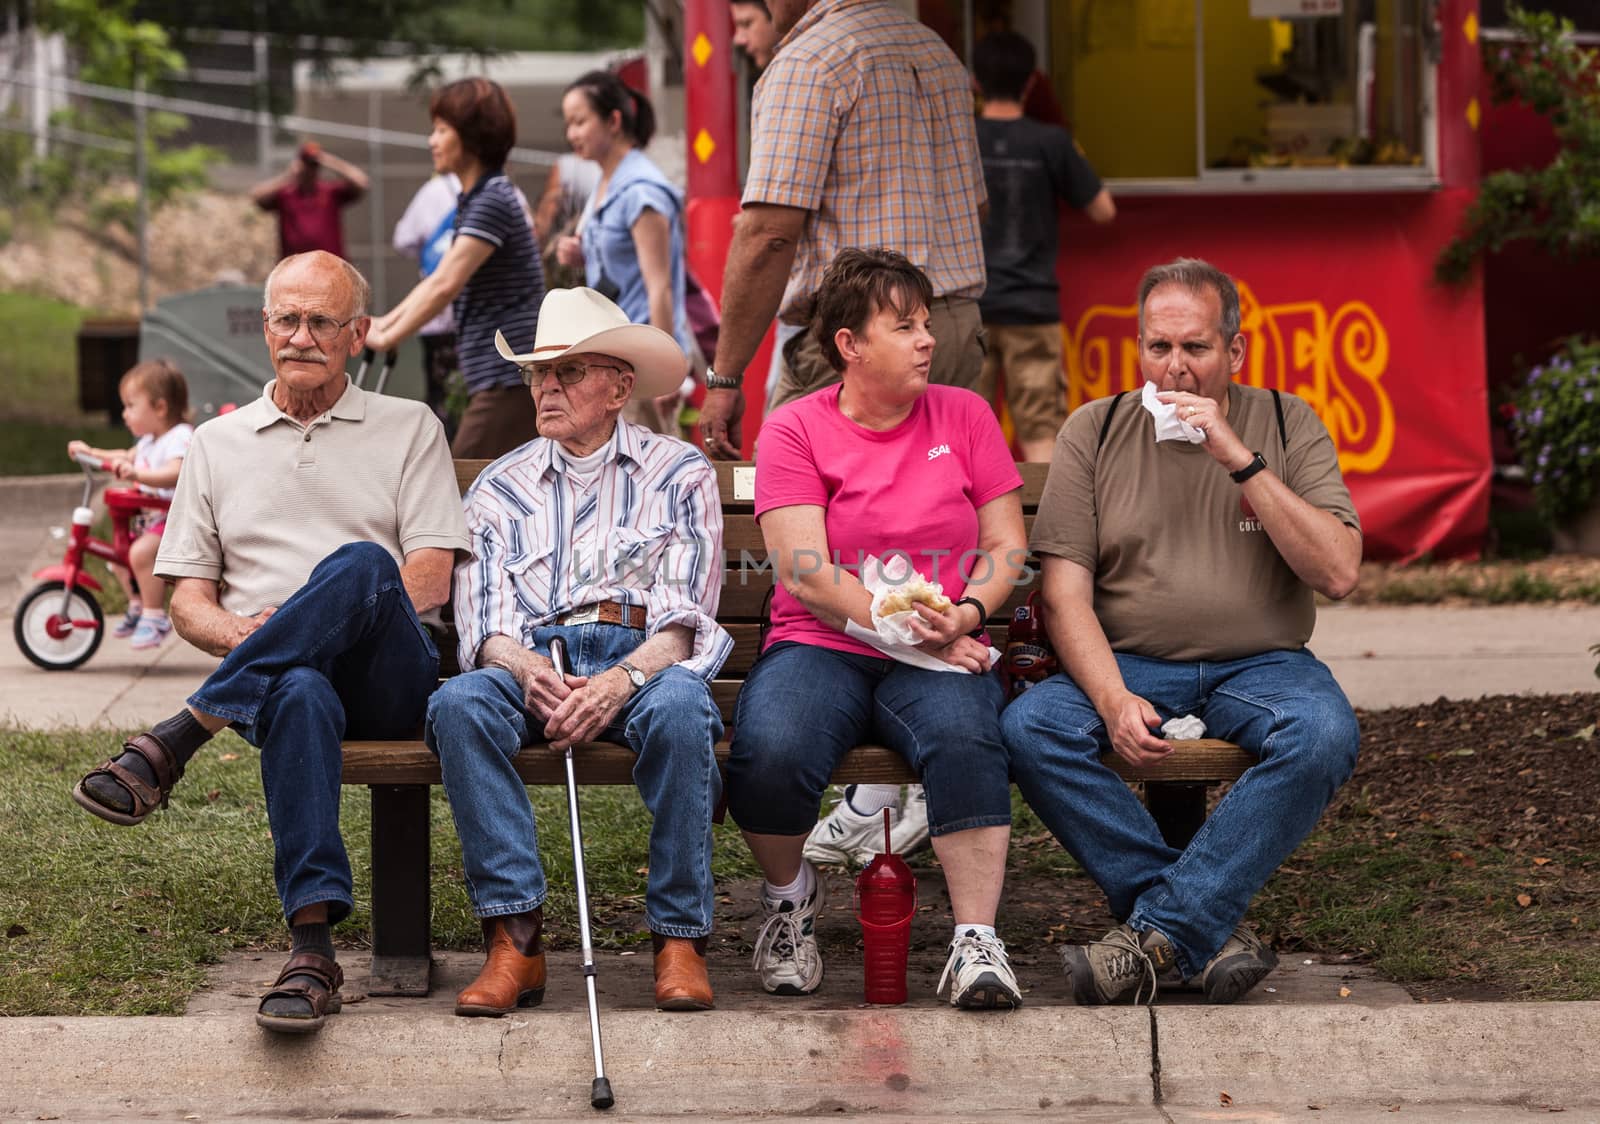 DES MOINES, IA /USA - AUGUST 10: Attendees at the Iowa State Fair. Unidentified people enjoy food at the Iowa State Fair on August 10, 2014 in Des Moines, Iowa, USA.